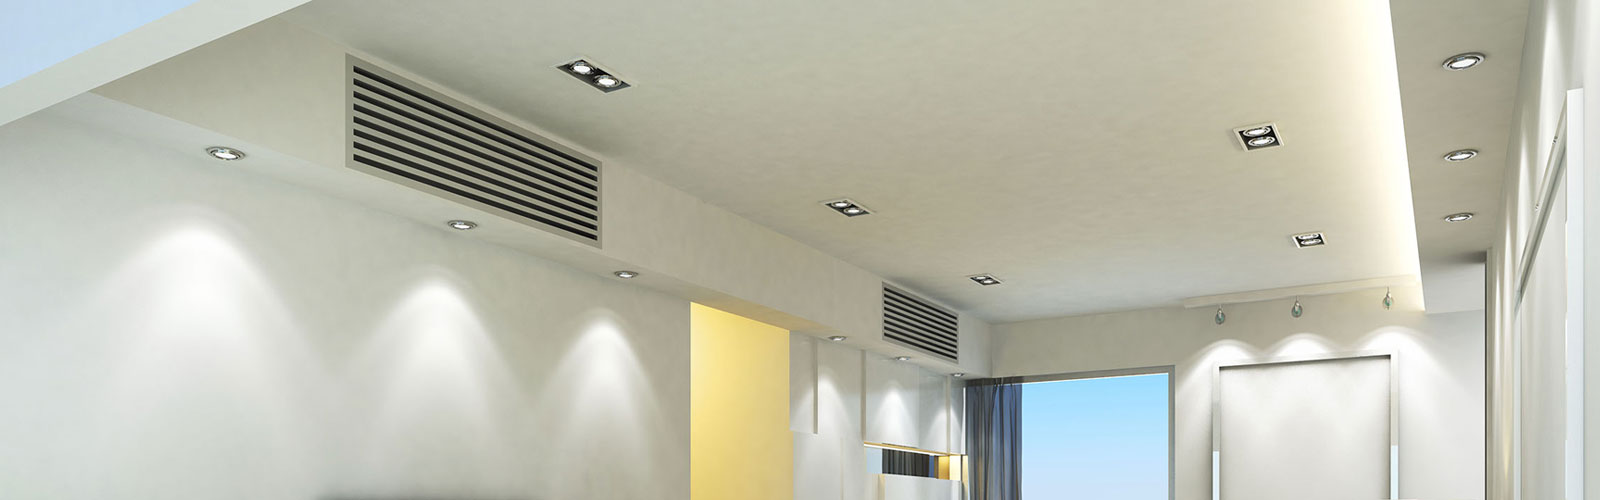 Residential Ducted Heating Installation services